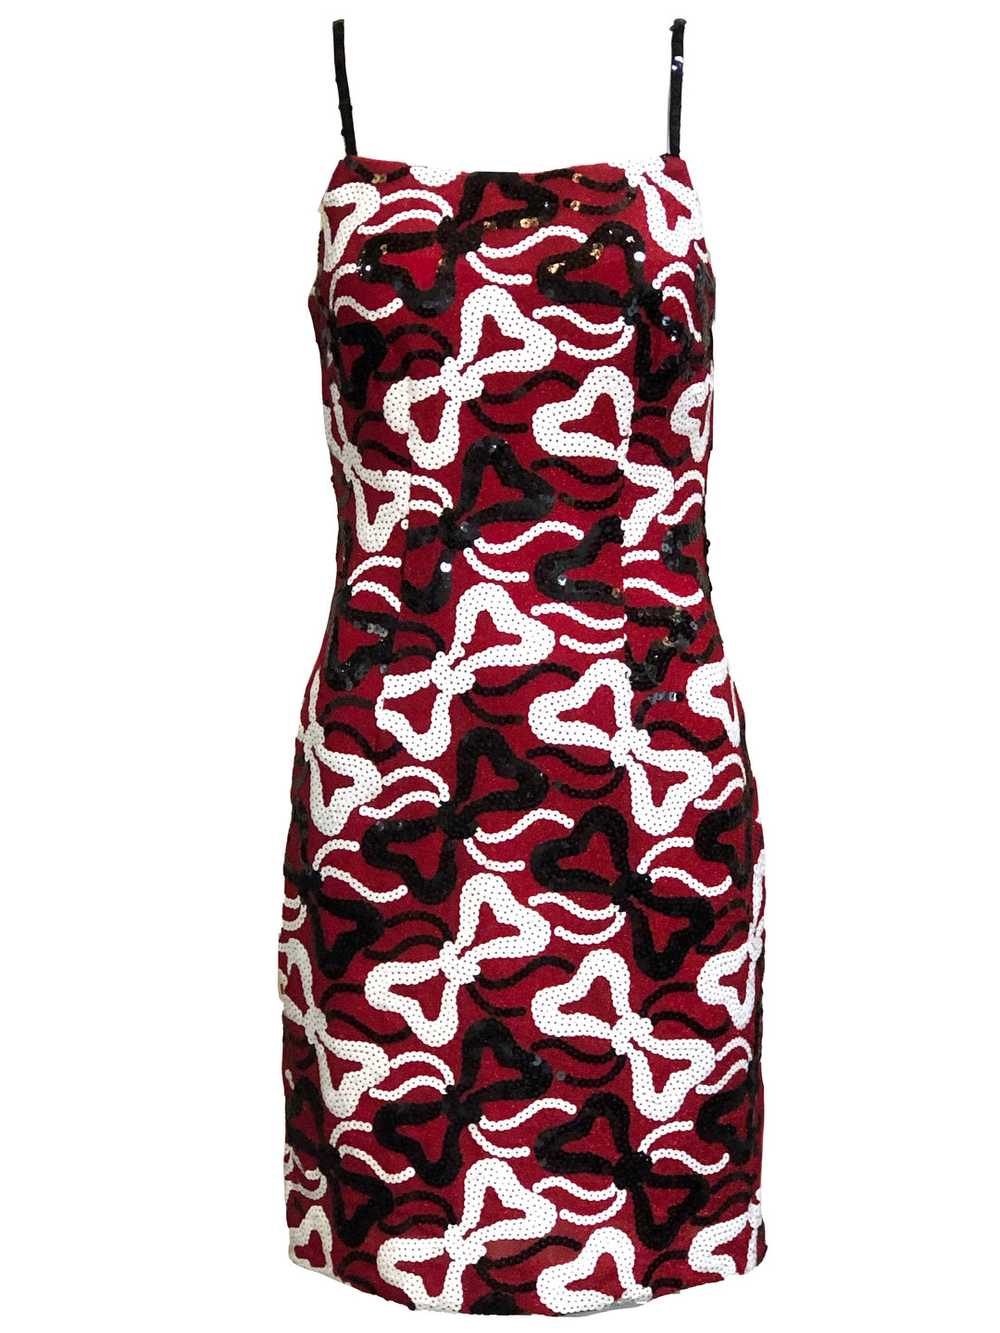 90s Red Dress with Black and White Palette Bows - image 1